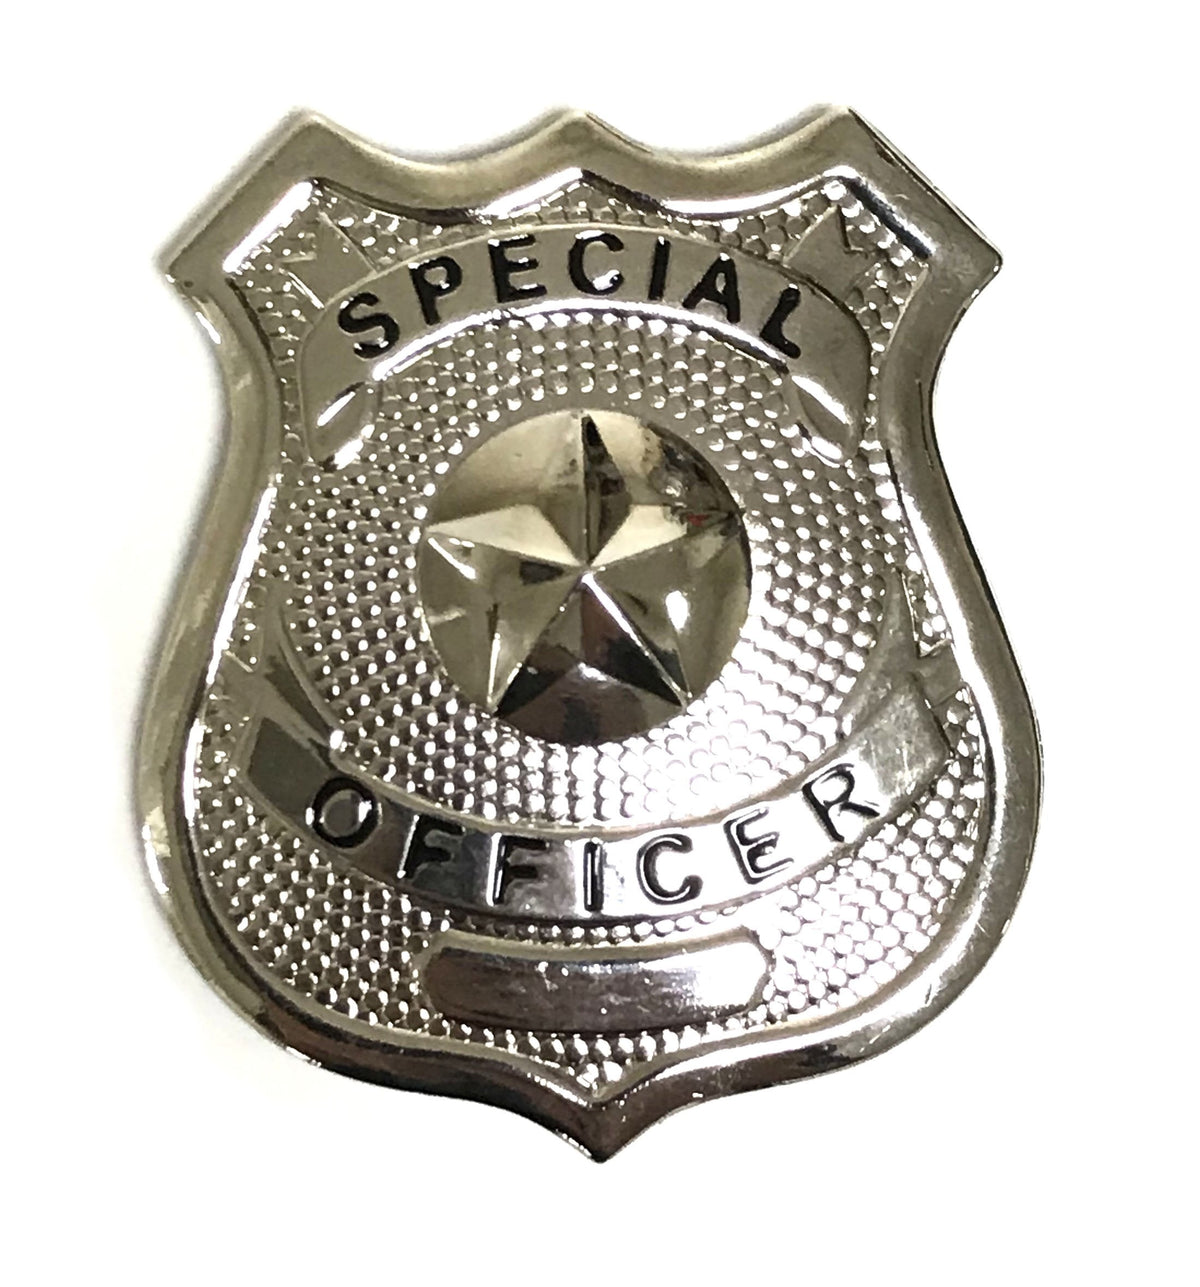 Metal Special Officer Police Style Badge Prop with Pin Back Closure - CHROME